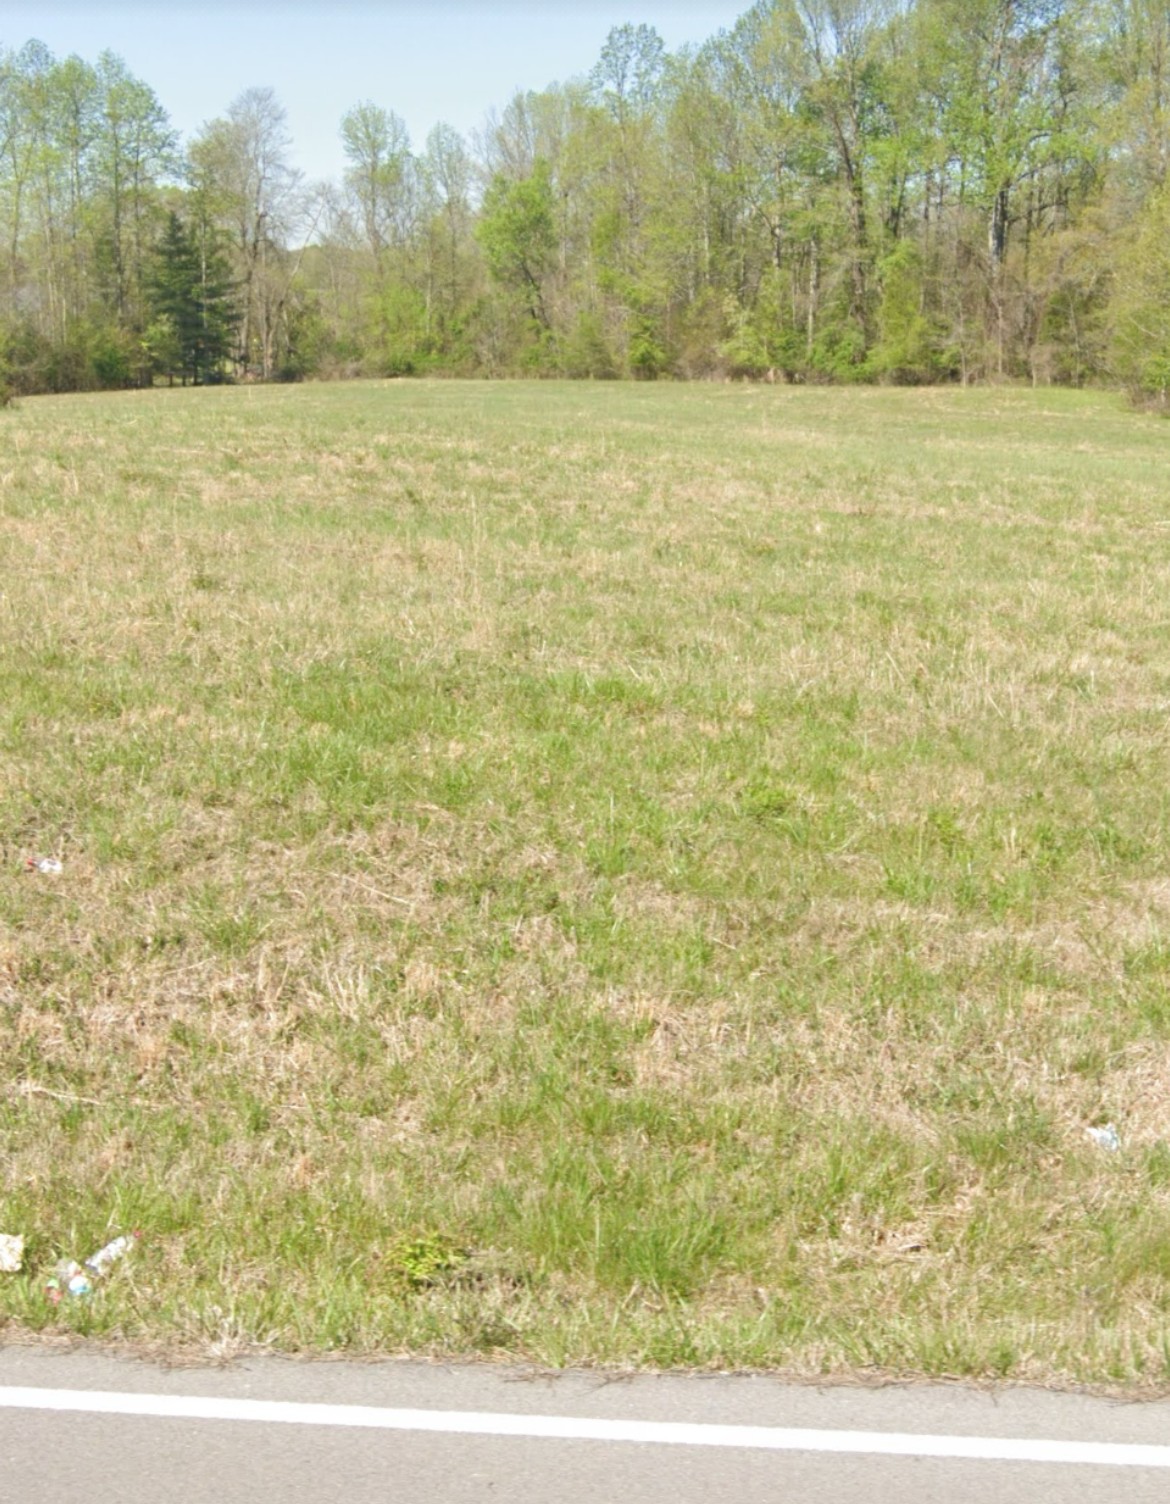 a view of a field with an outdoor space